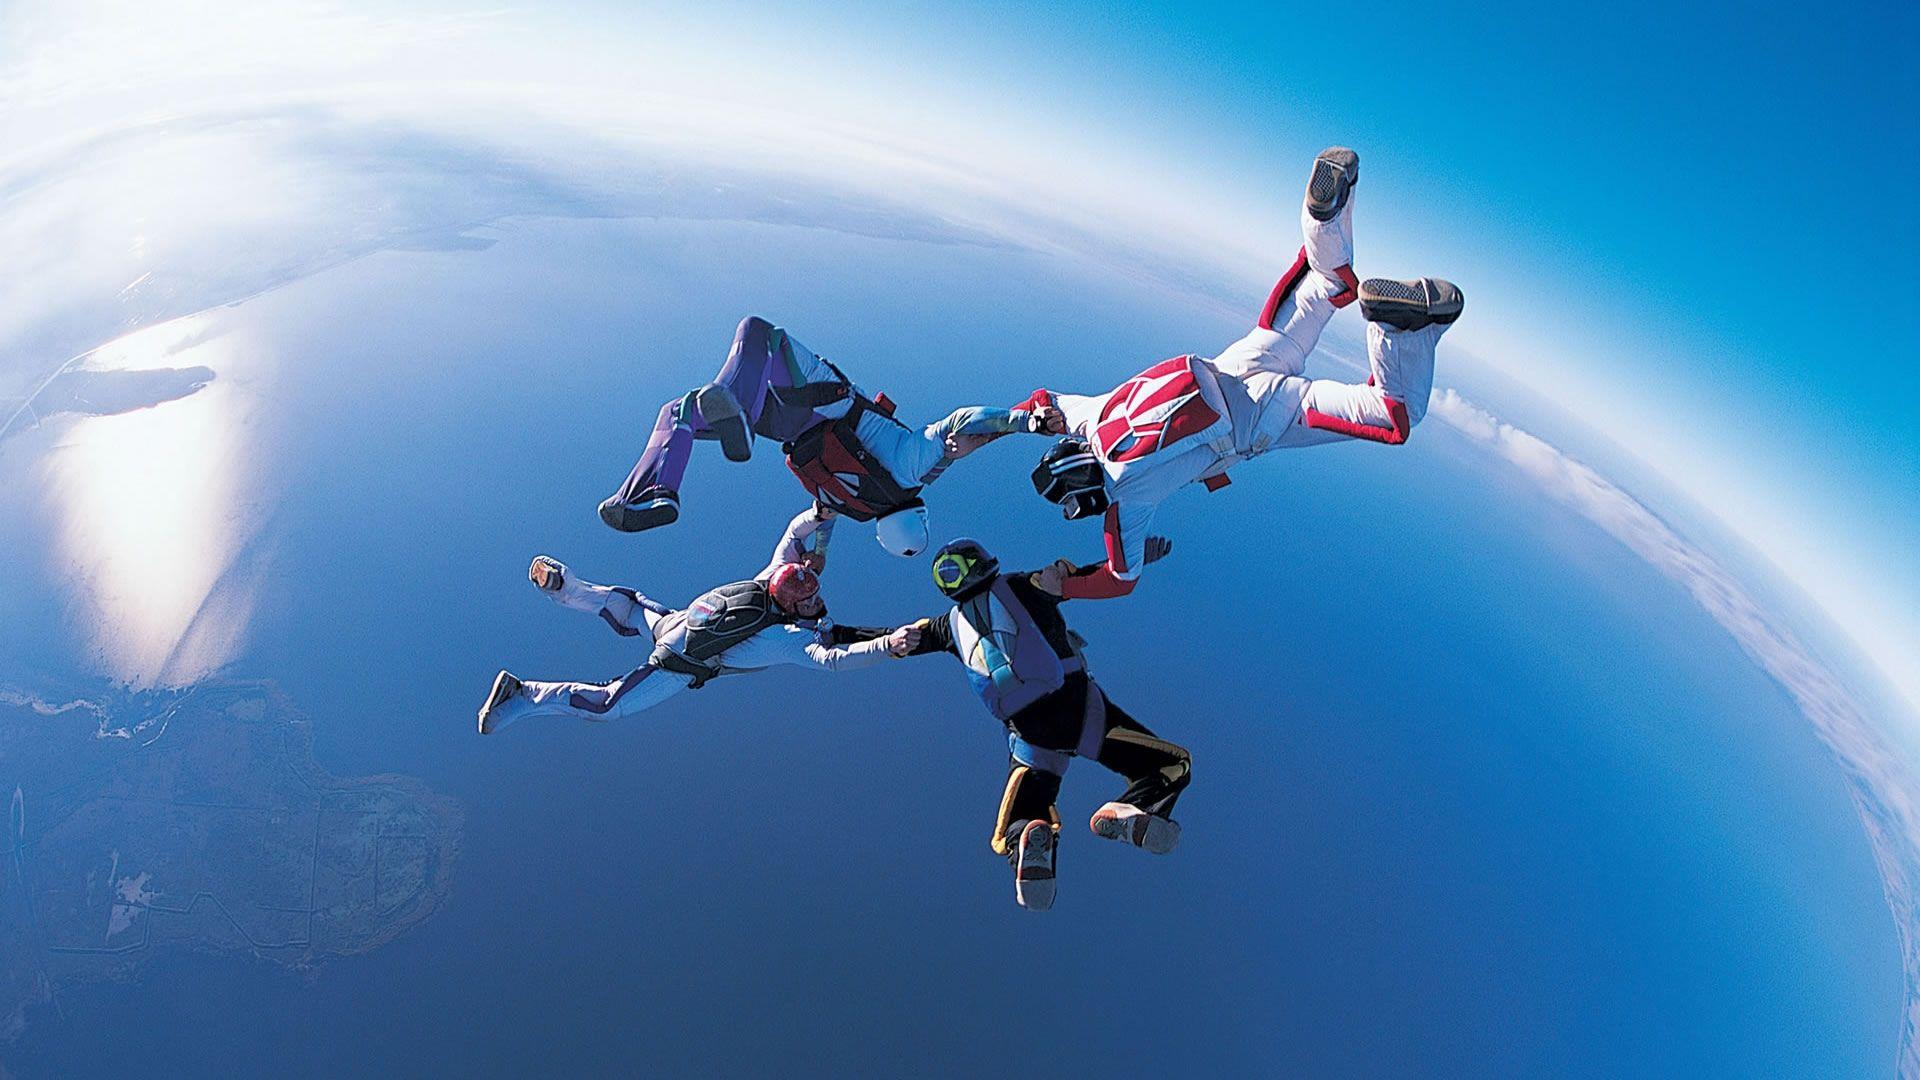 Amazing Extreme Sports Sky Diving Wallpaper #Amazing #Diving